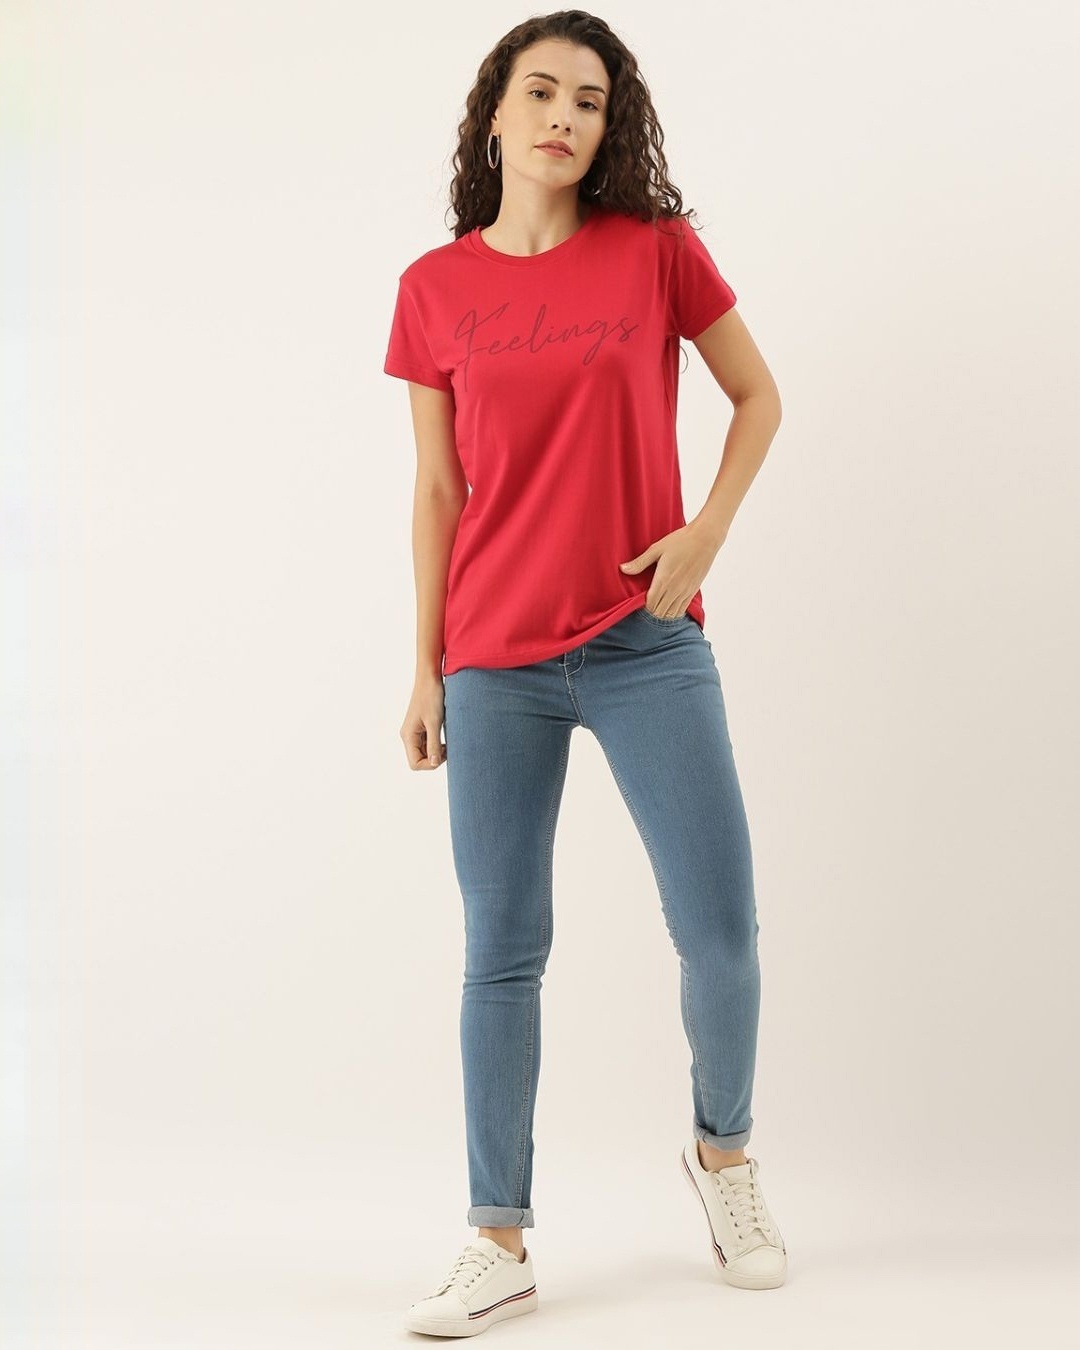 Shop Women's Red Typography T-shirt